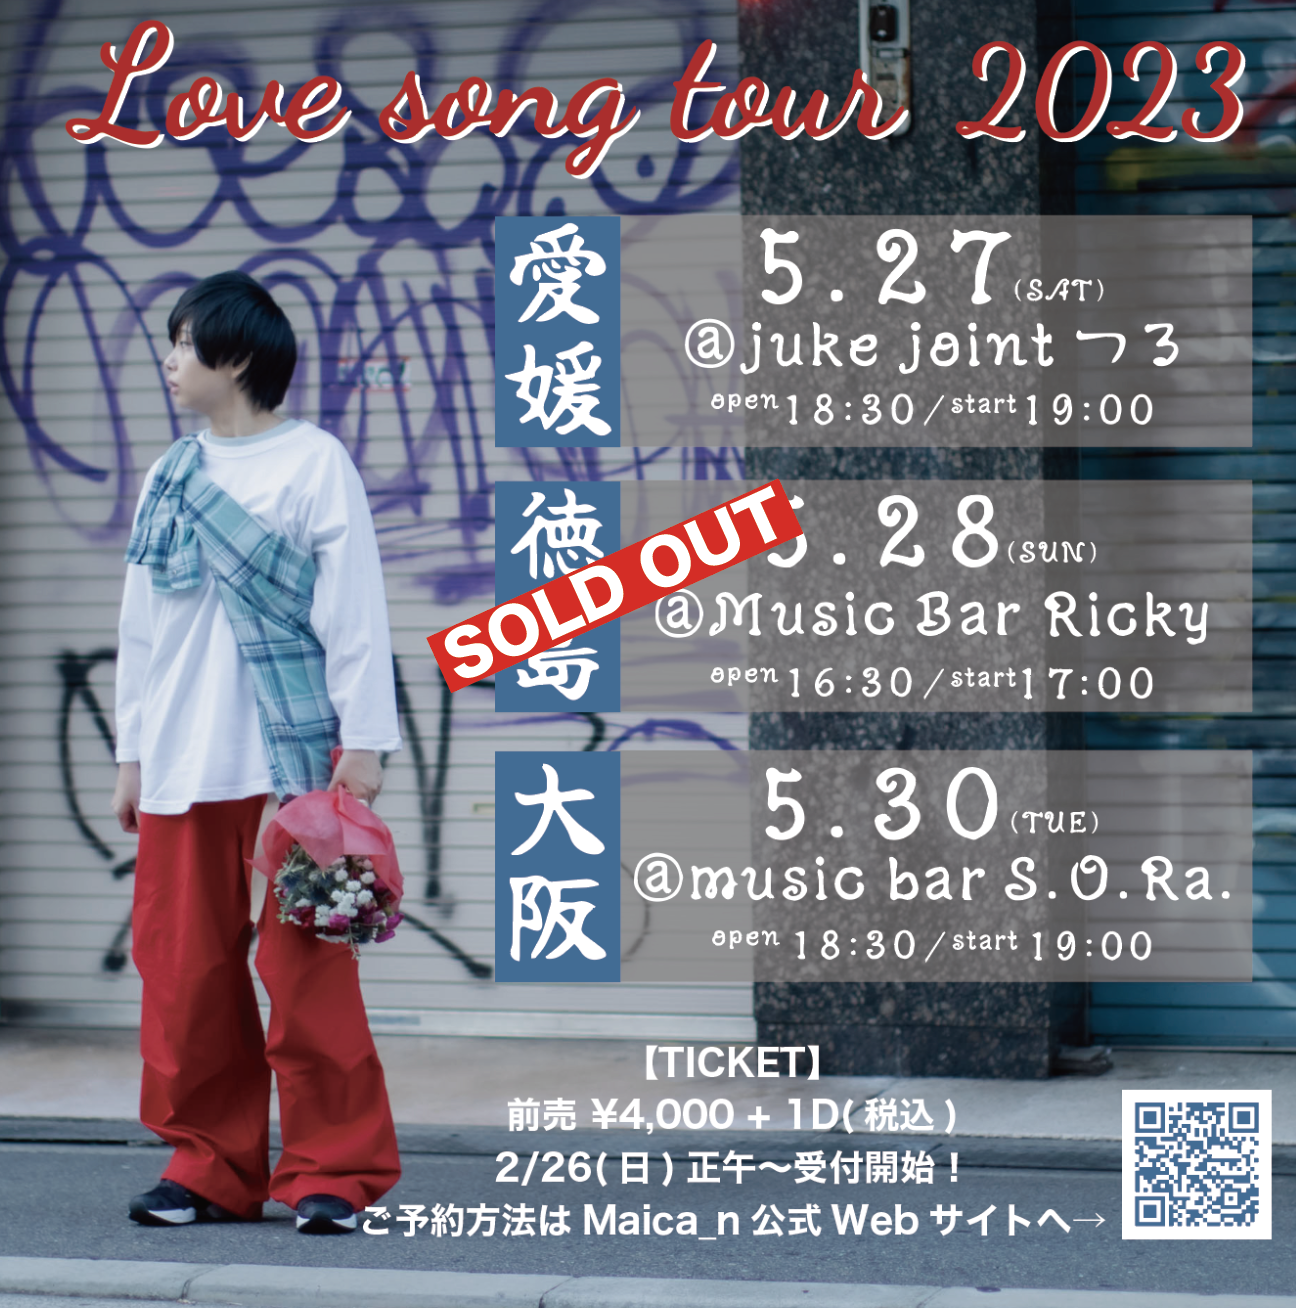 「Love song tour 2023」